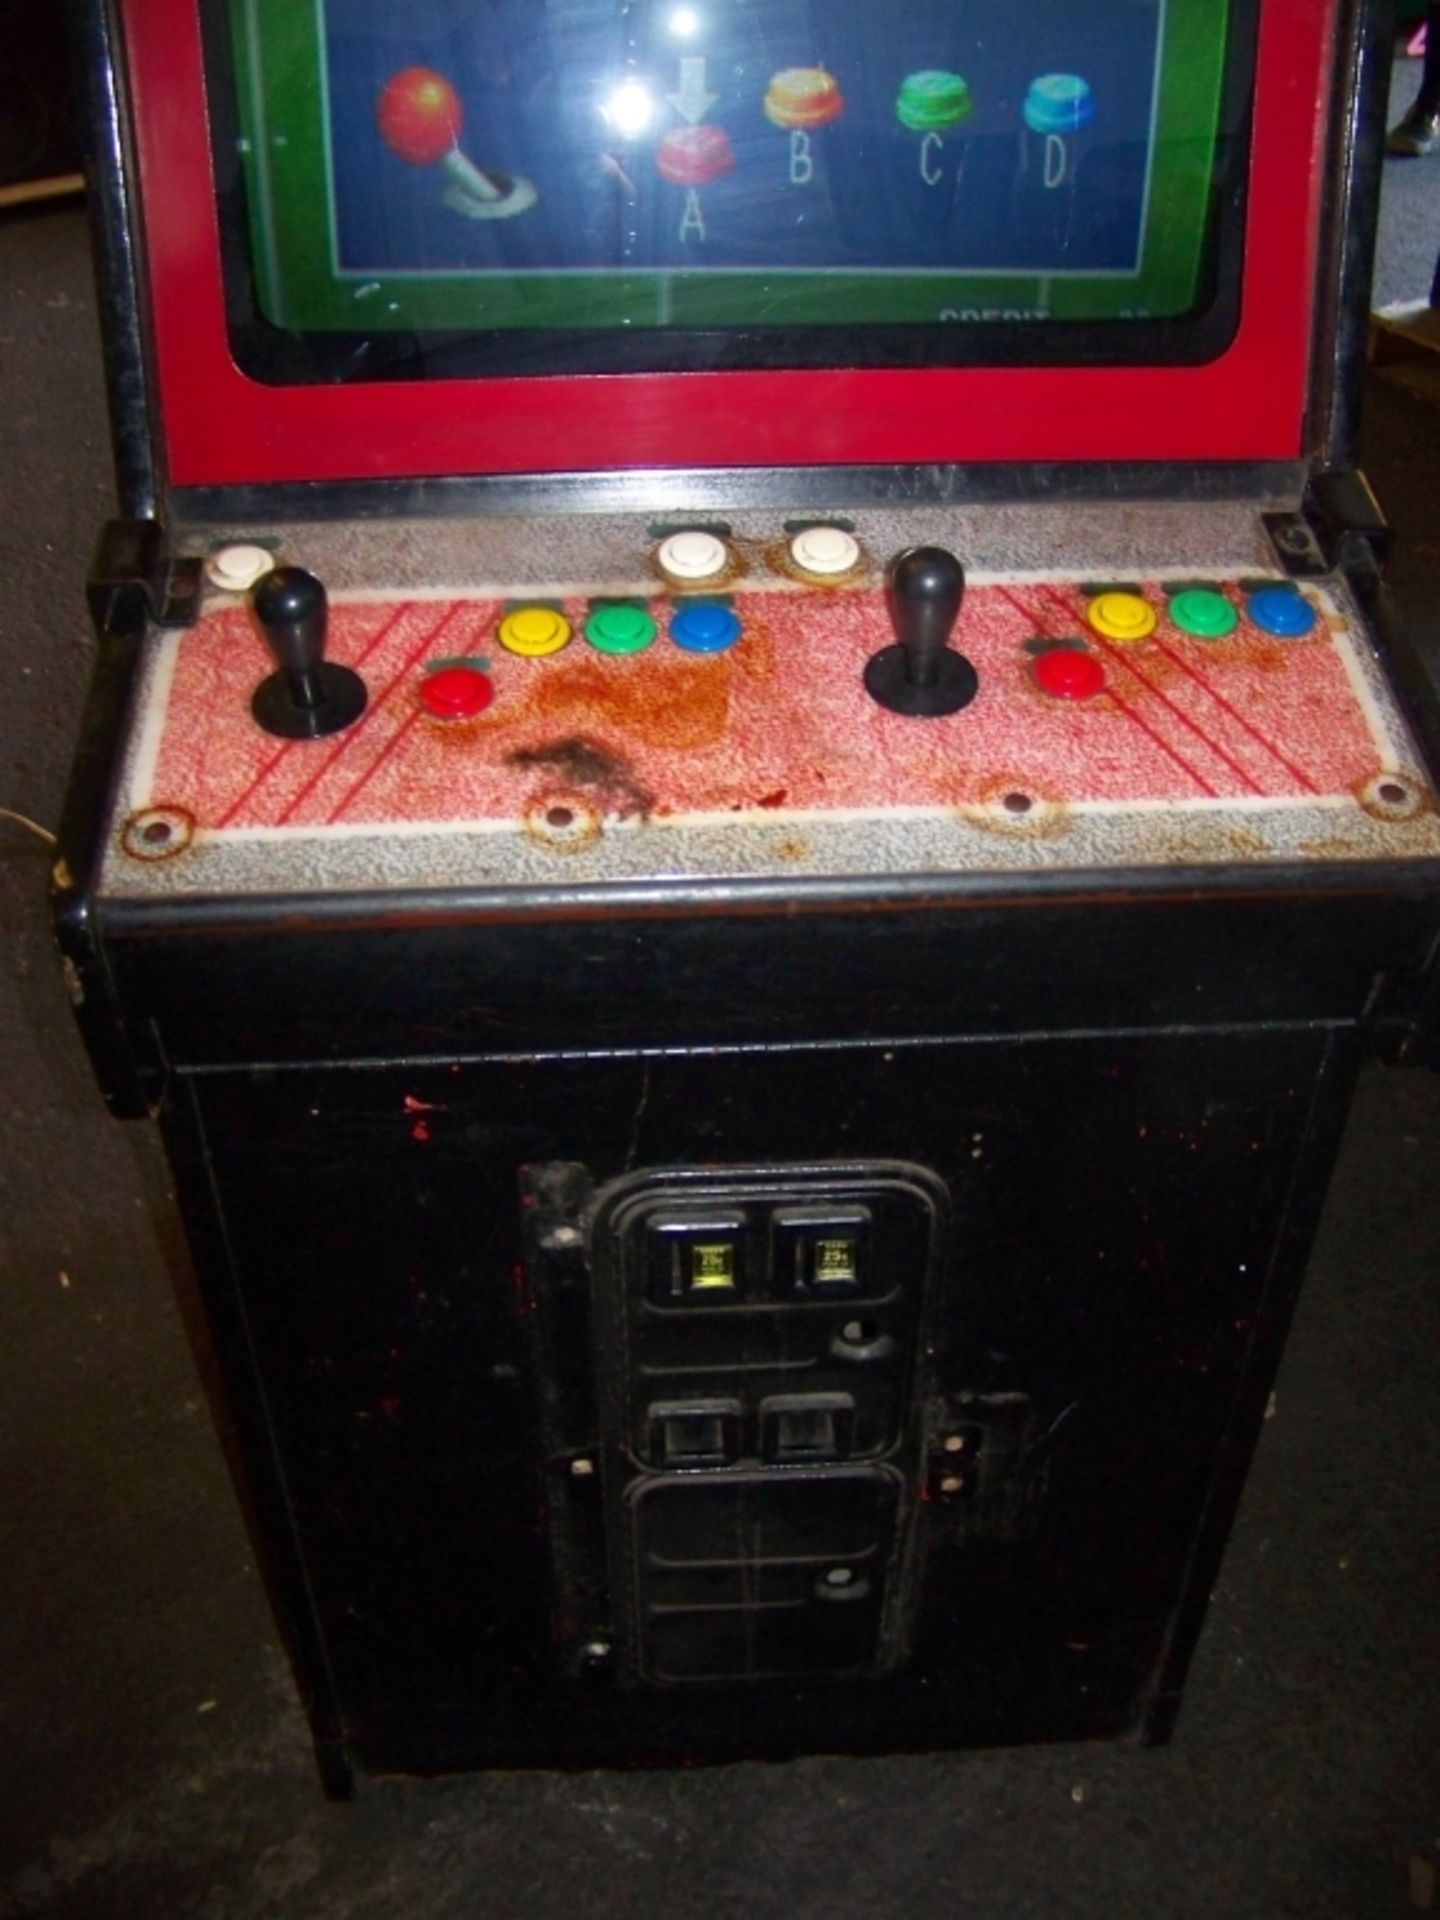 NEO GEO 4 SLOT SNK ARCADE GAME Item is in used condition. Evidence of wear and commercial operation. - Image 4 of 4